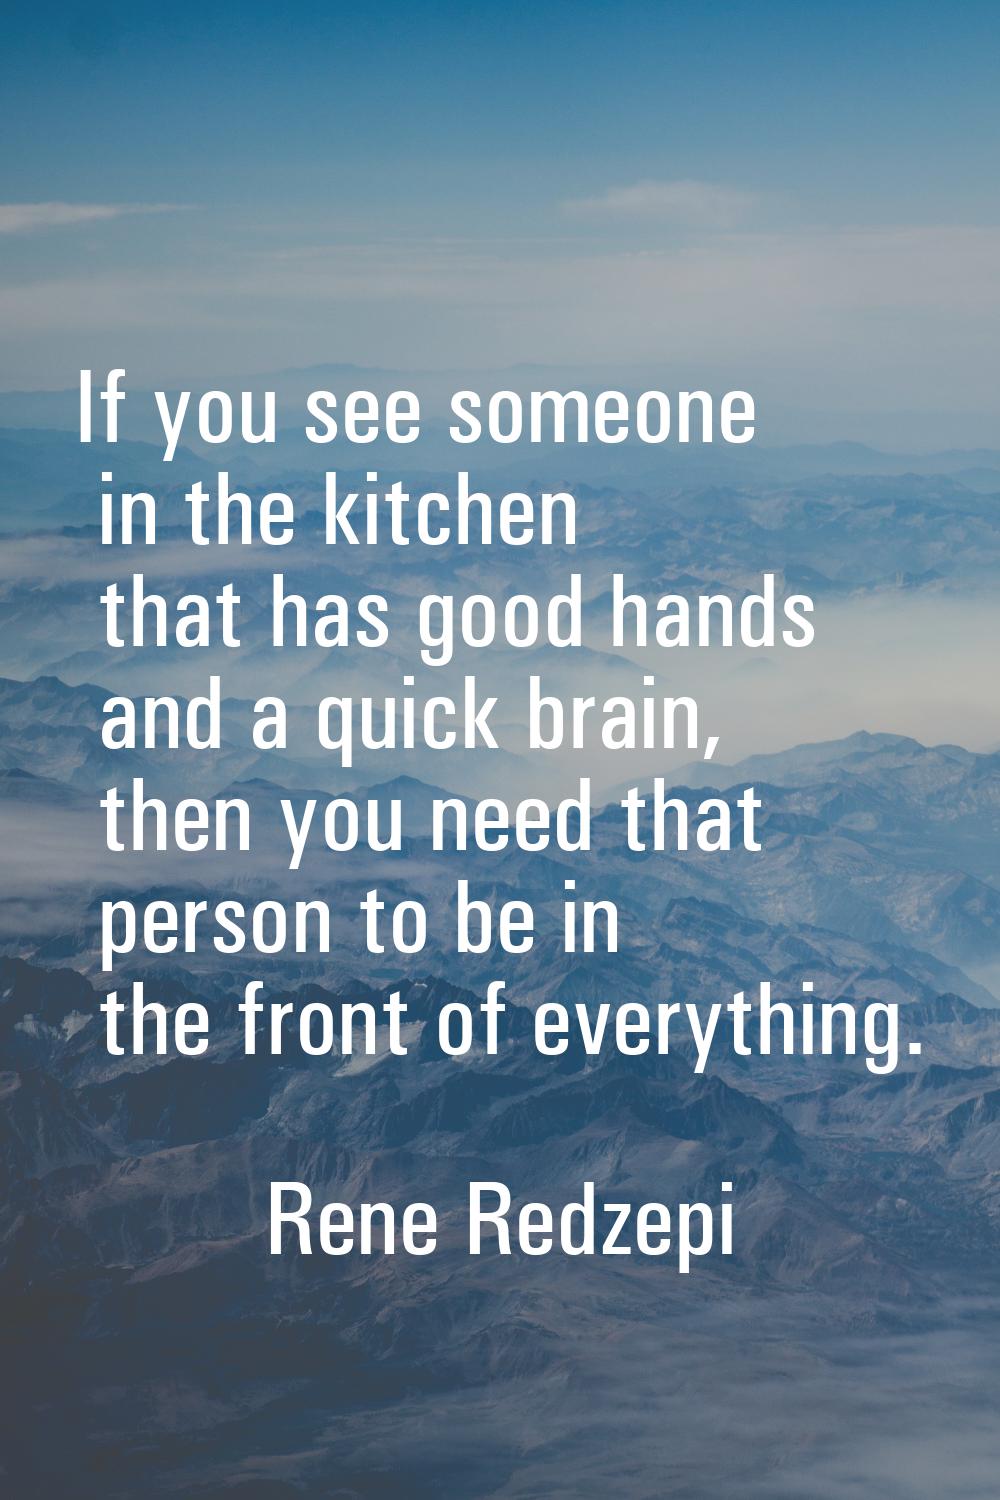 If you see someone in the kitchen that has good hands and a quick brain, then you need that person 